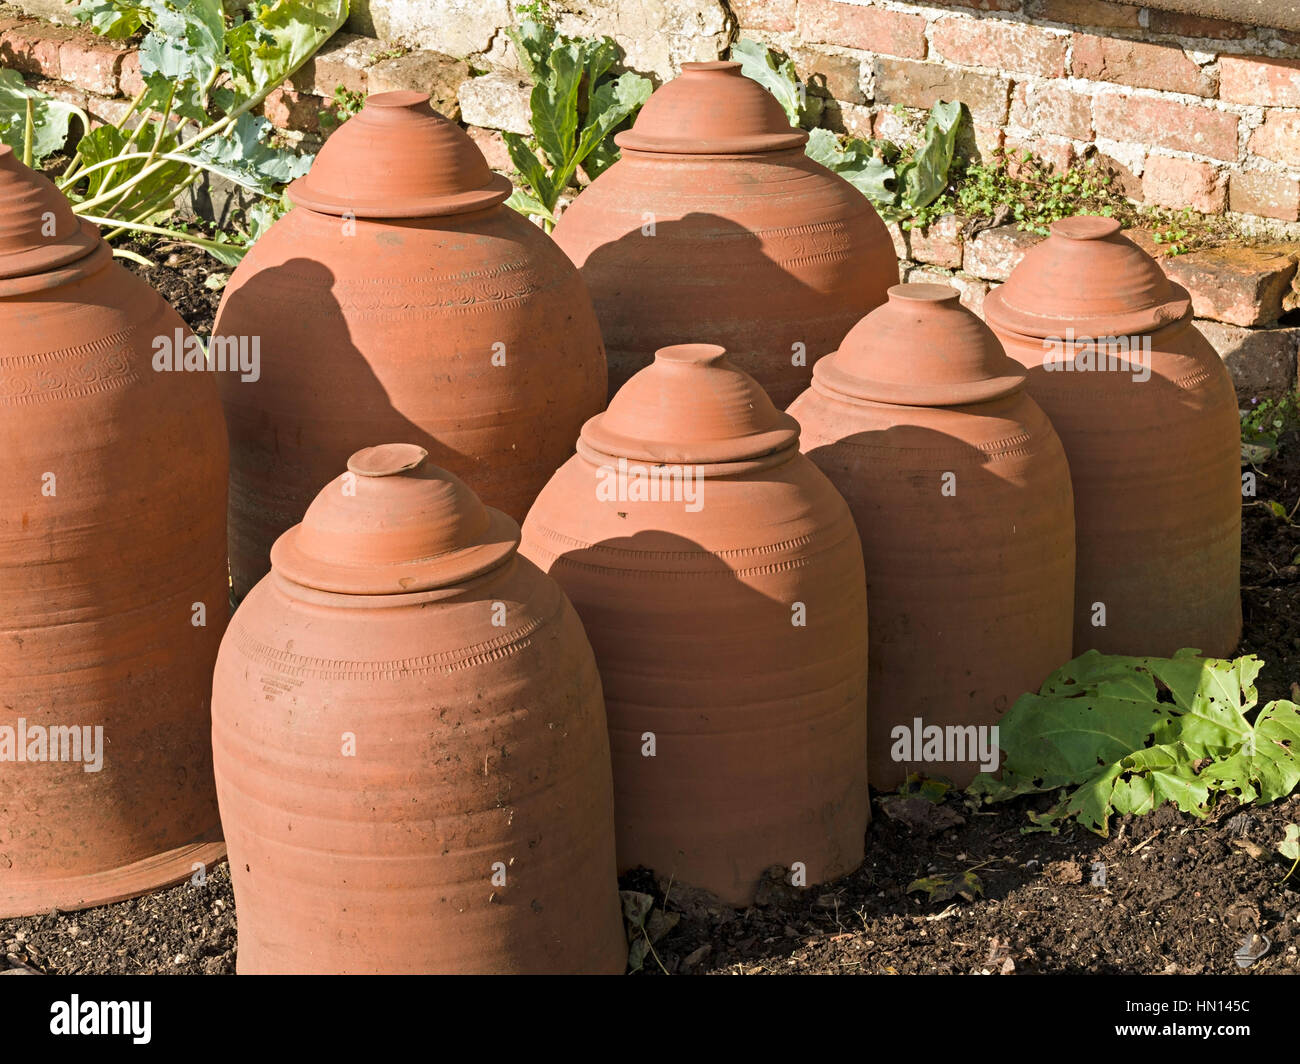 Terracotta Rhubarb forcing pots Stock Photo